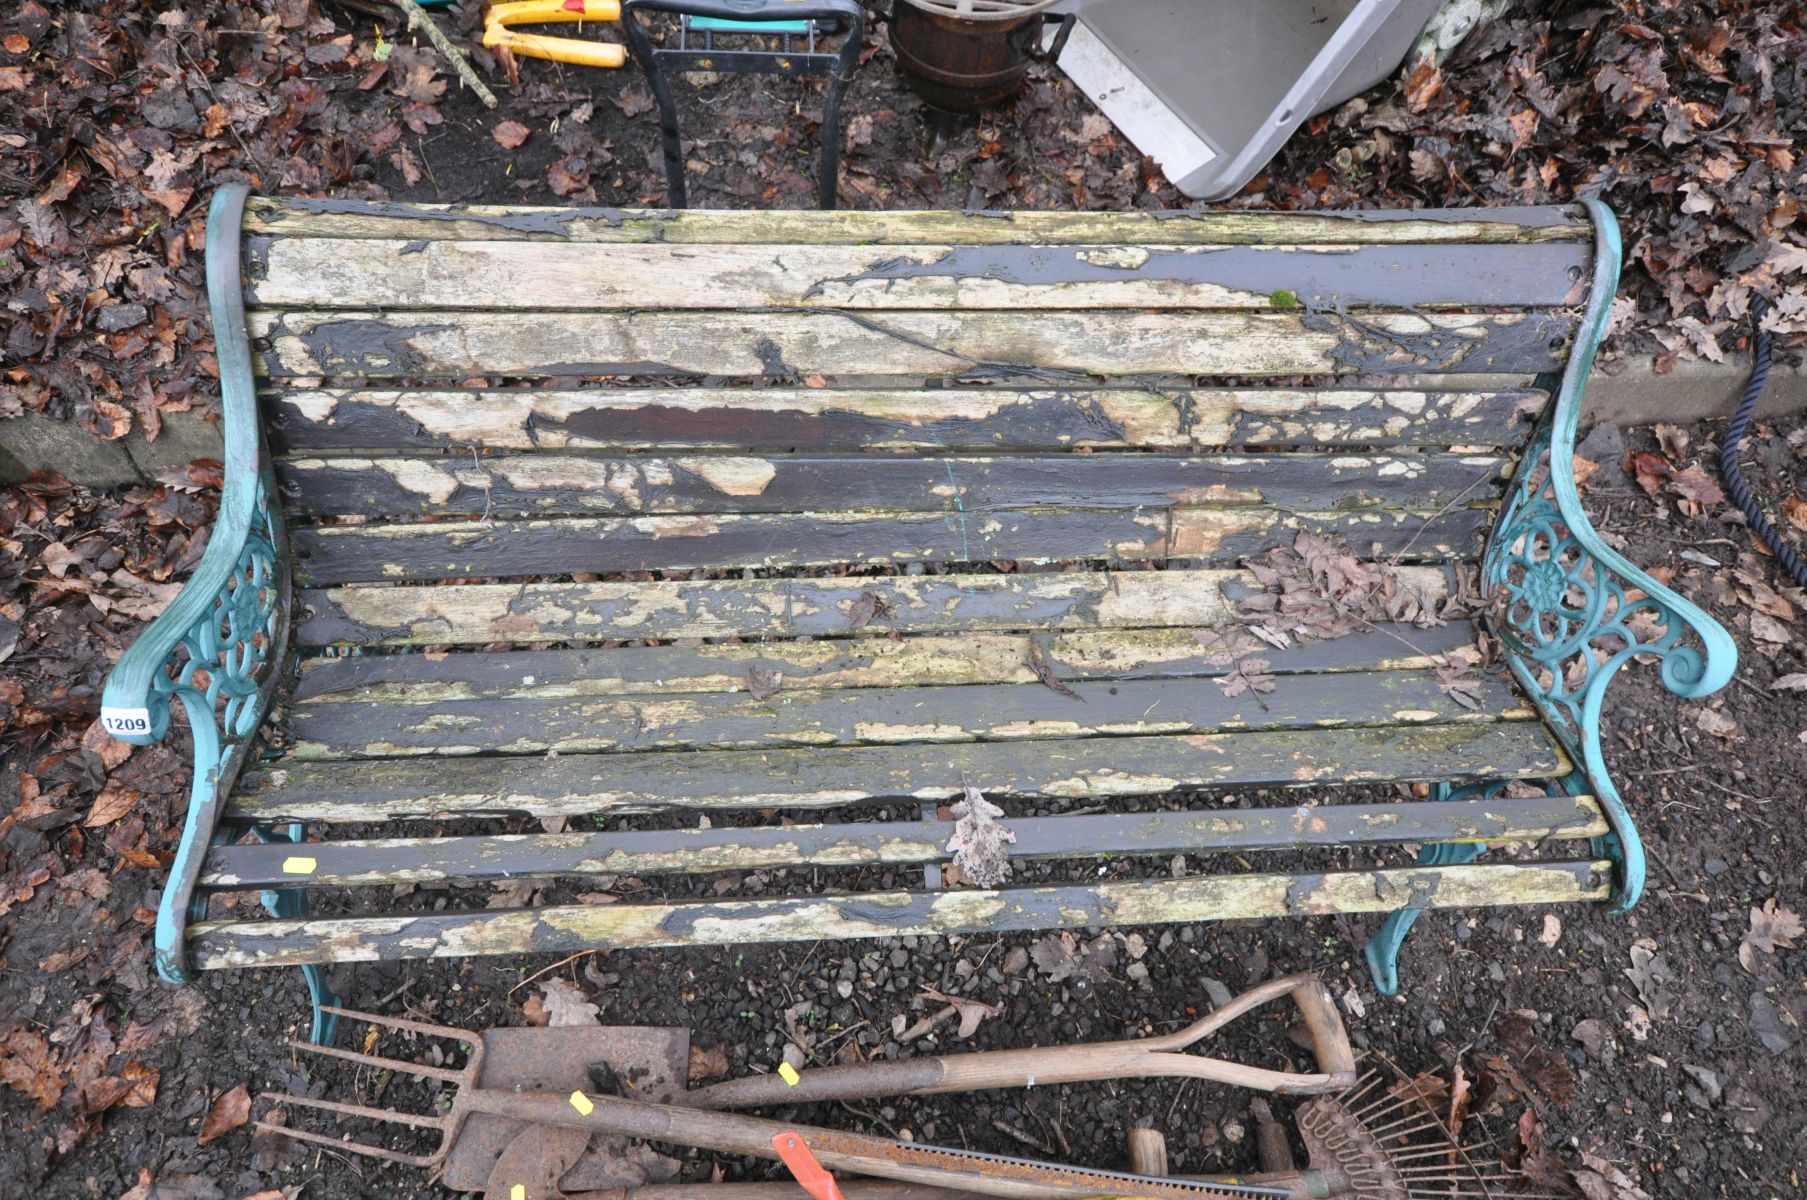 AN ALUMINIUM GARDEN BENCH with distressed slats, length 125cm, various garden hand tools and a - Image 2 of 2